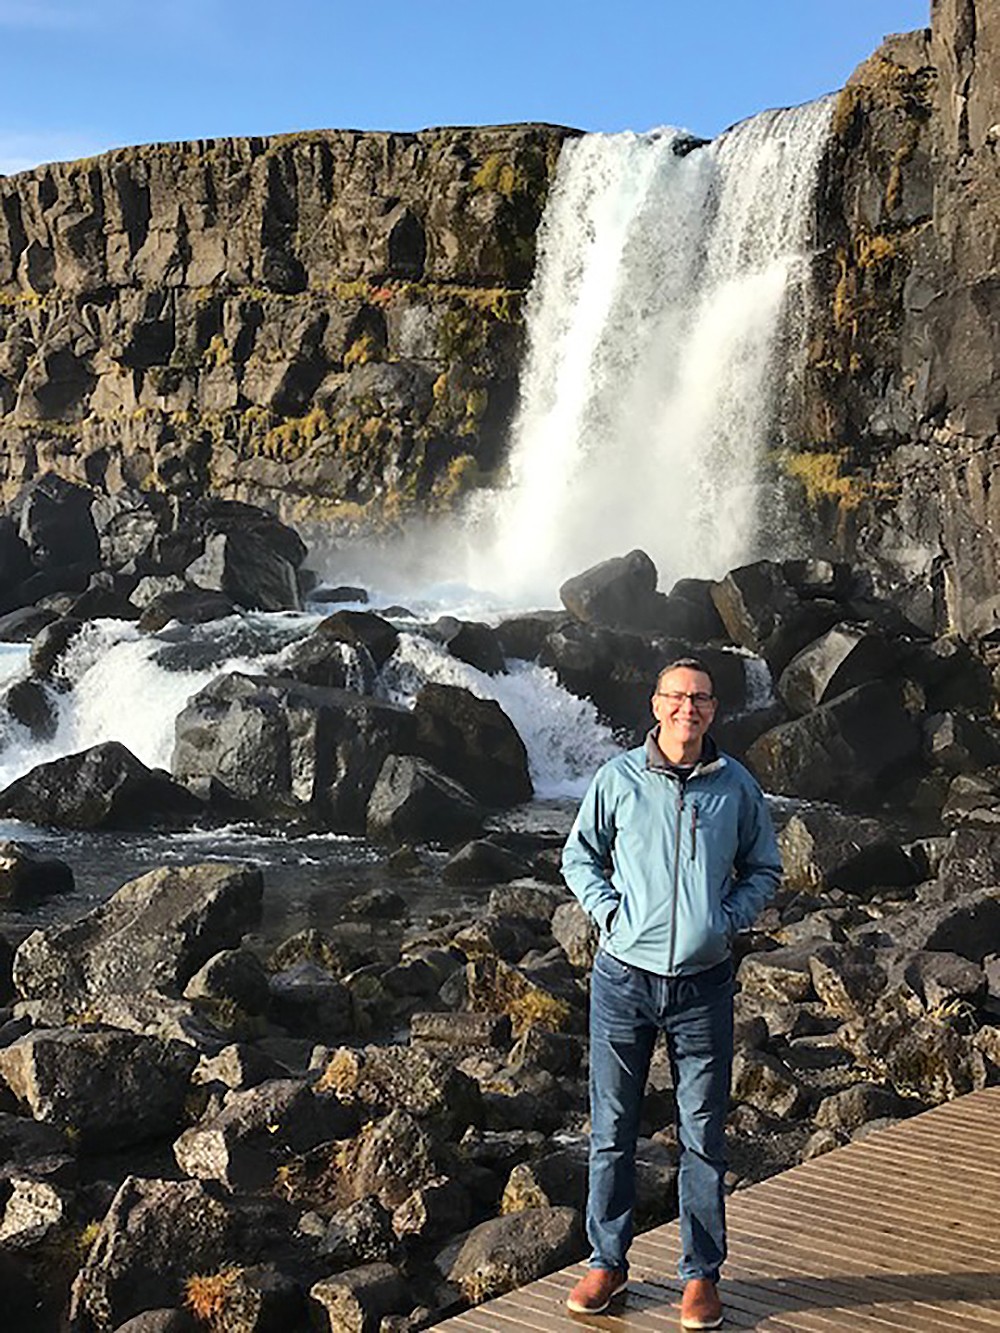 President Herbert poses at a waterfall in Iceland